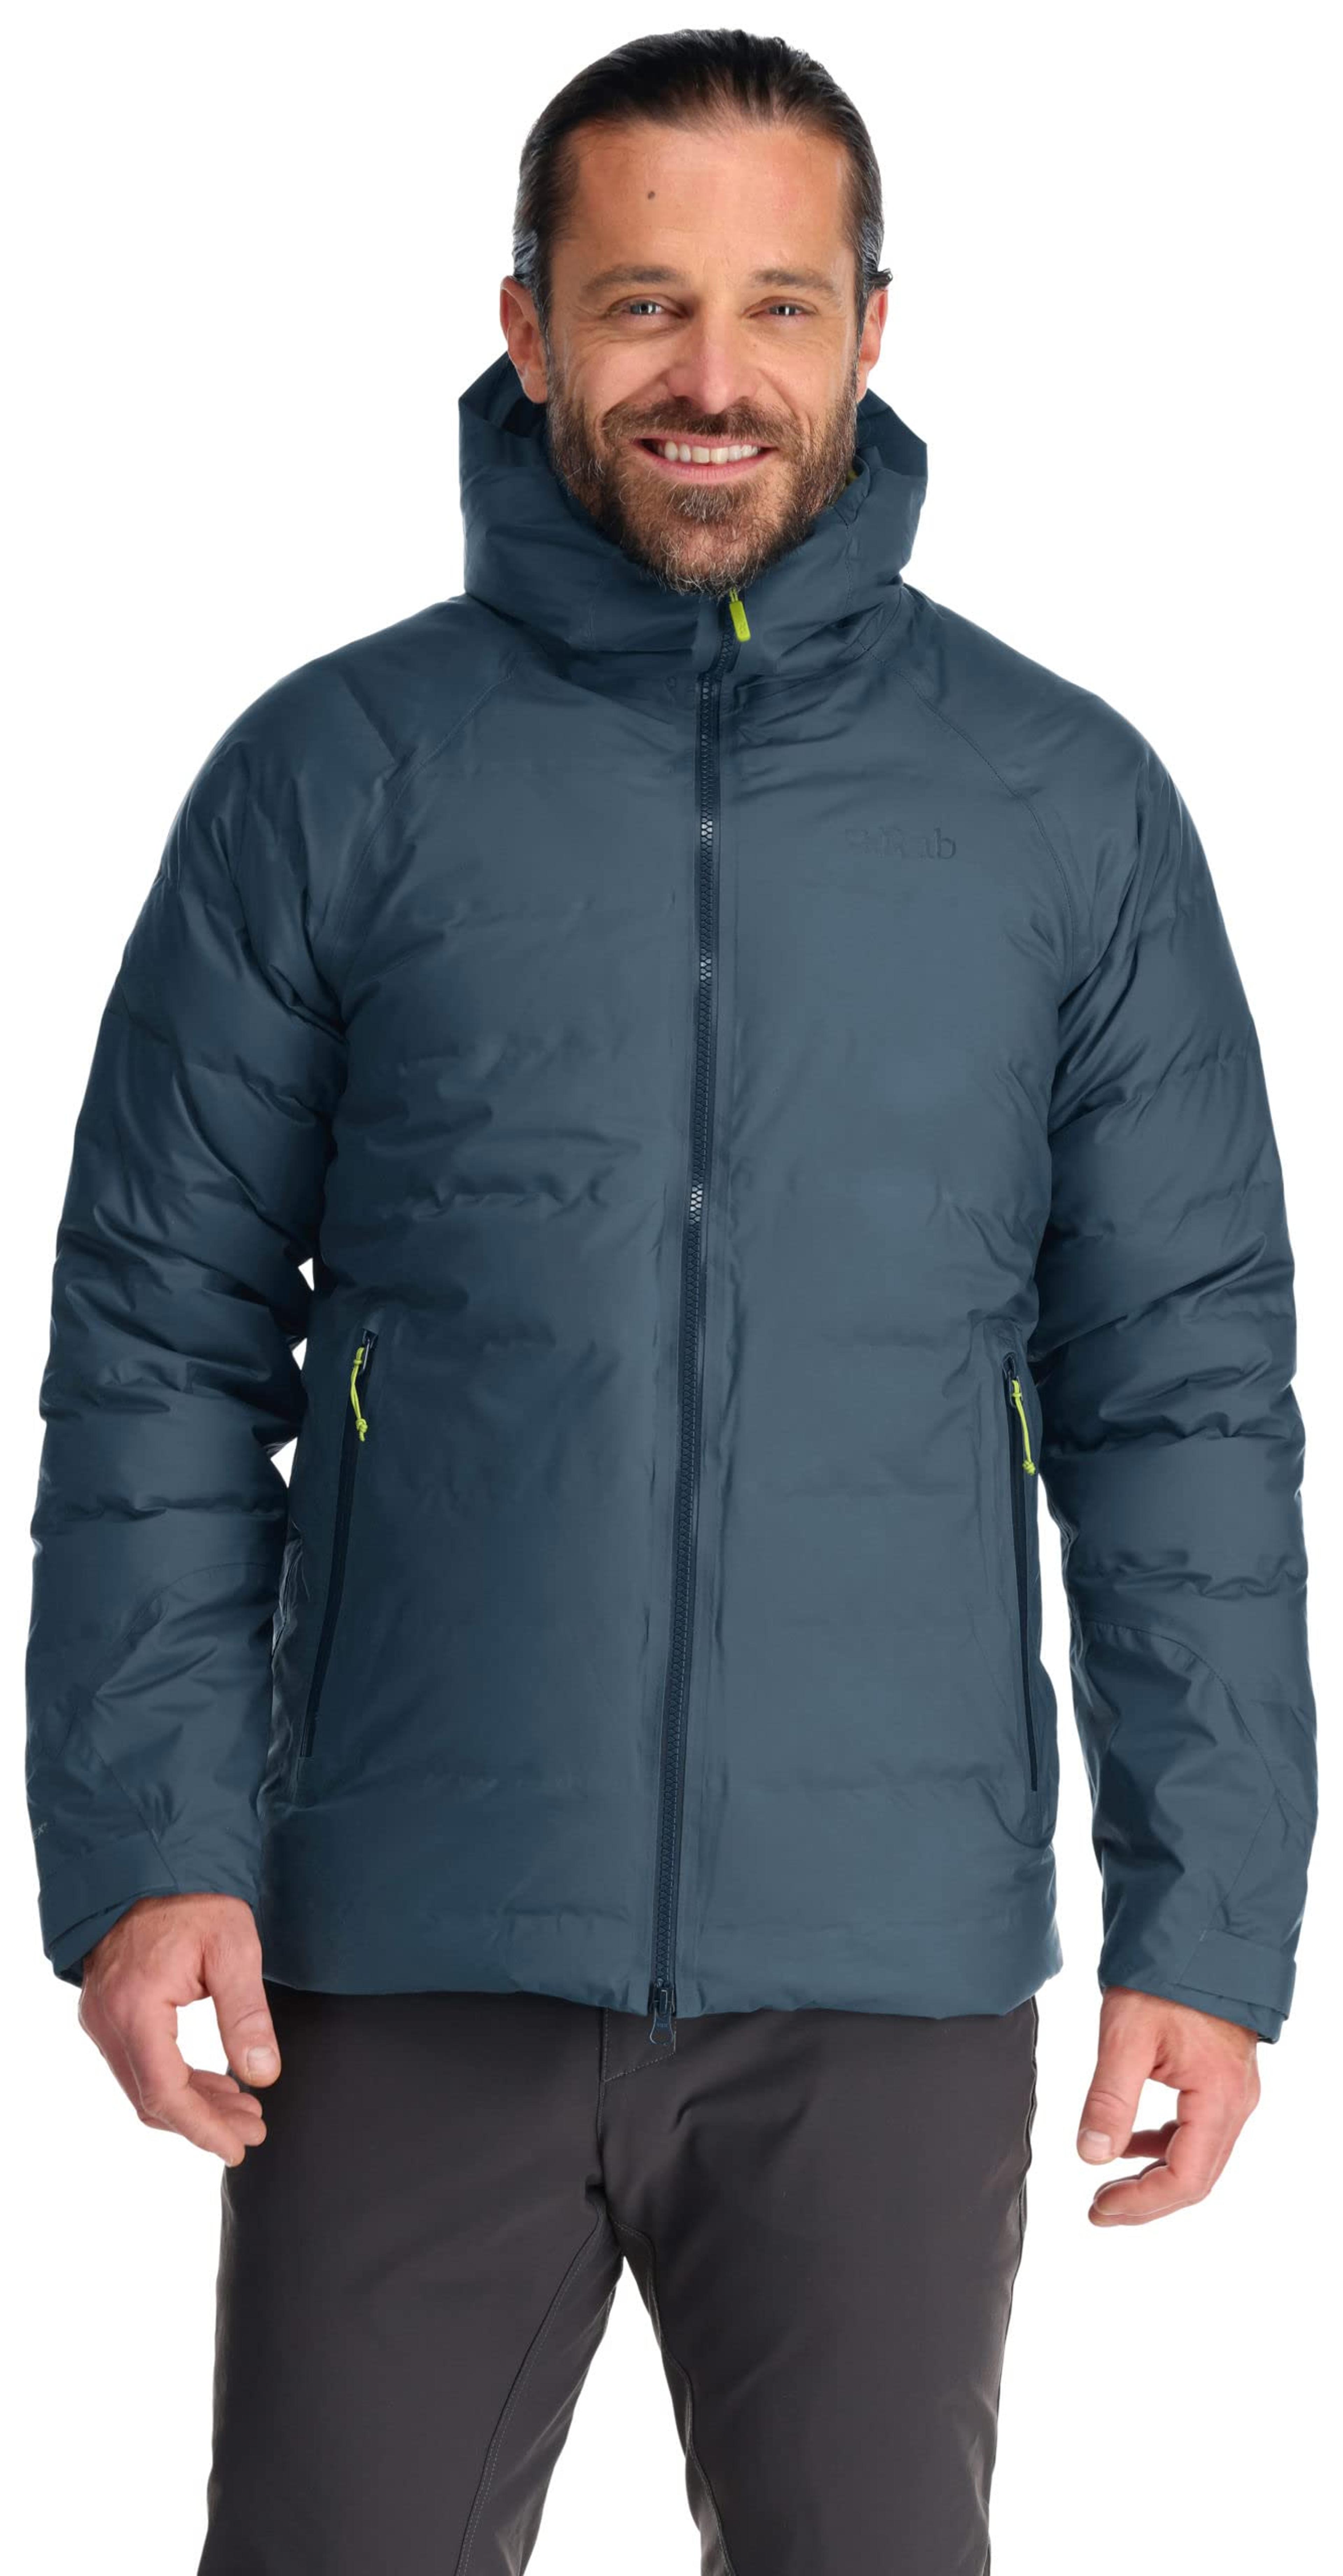 Amazon.com : Rab Men's Valiance Down Jacket for Climbing and Mountaineering : Clothing, Shoes & Jewelry